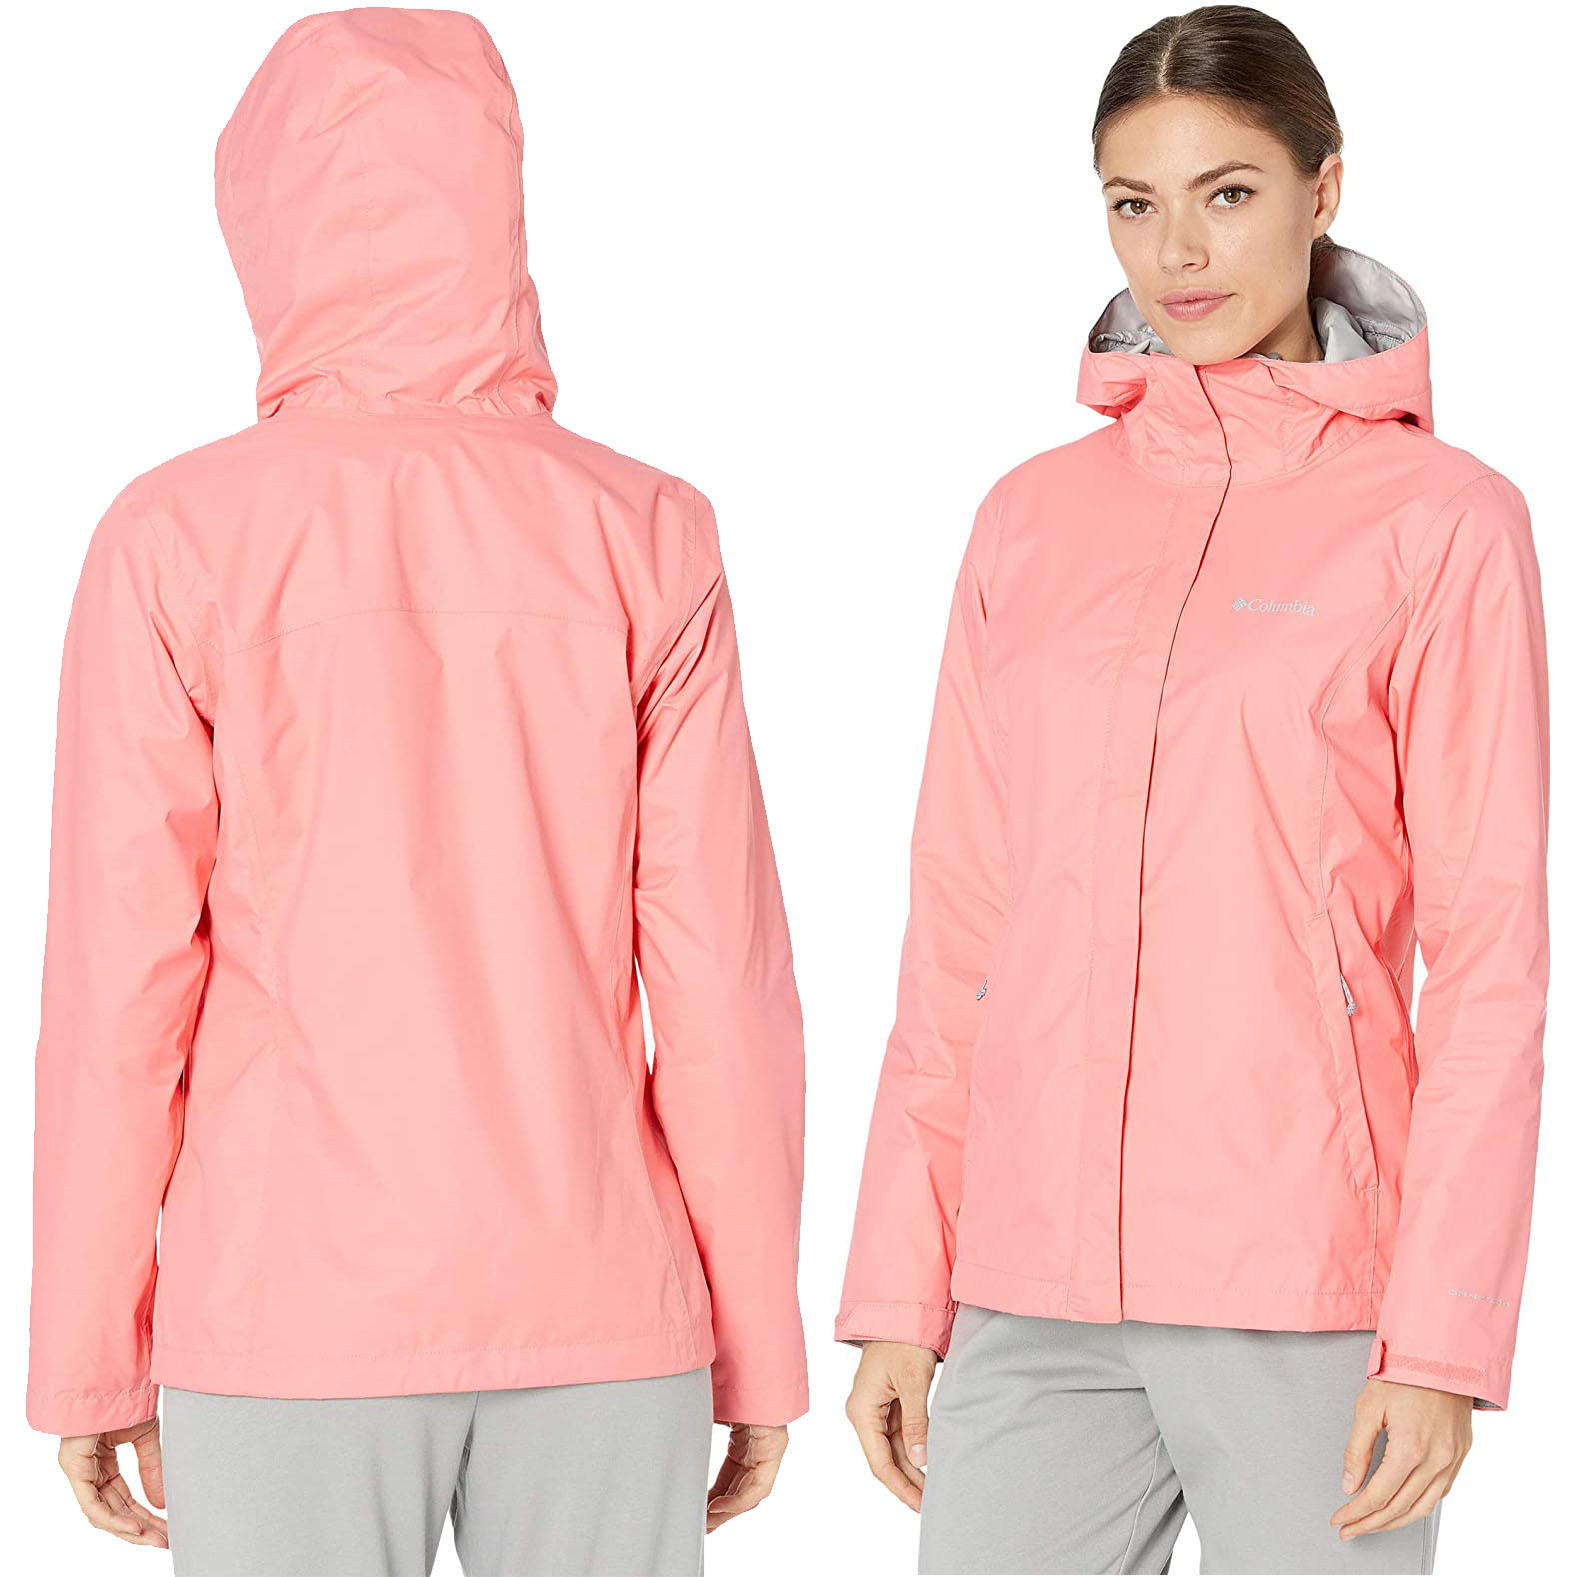 Available in multiple colors, the Arcadia II nylon jacket is waterproof and breathable